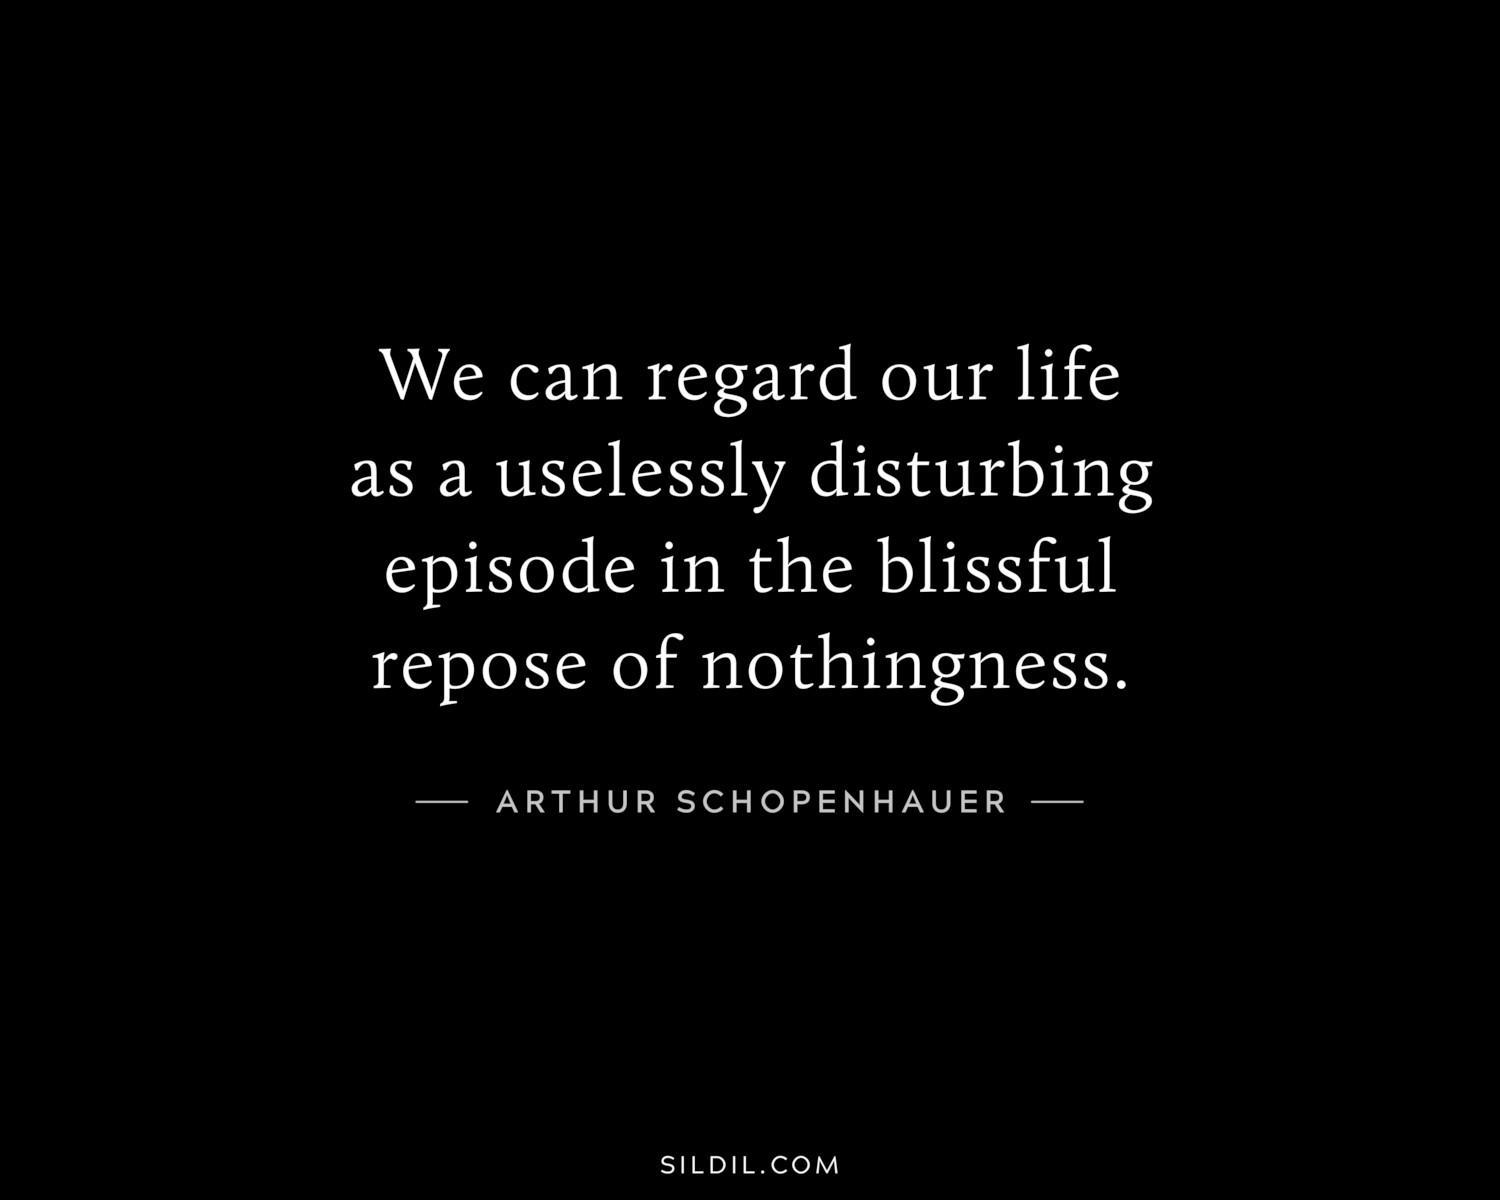 We can regard our life as a uselessly disturbing episode in the blissful repose of nothingness.